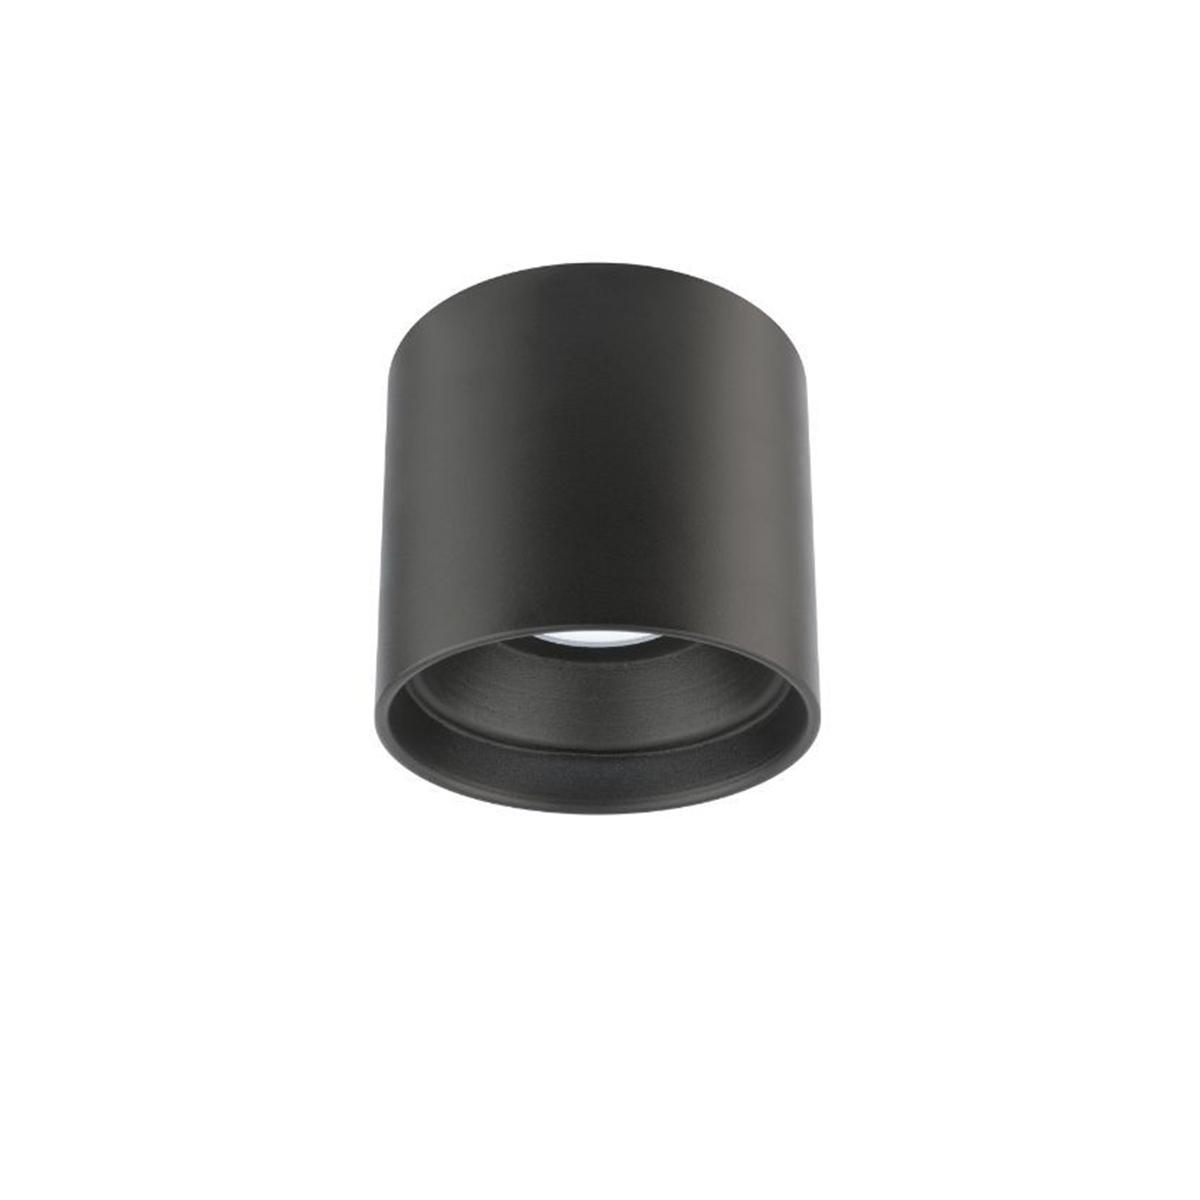 DOWNTOWN 5 in. Round LED Outdoor Flush Mount